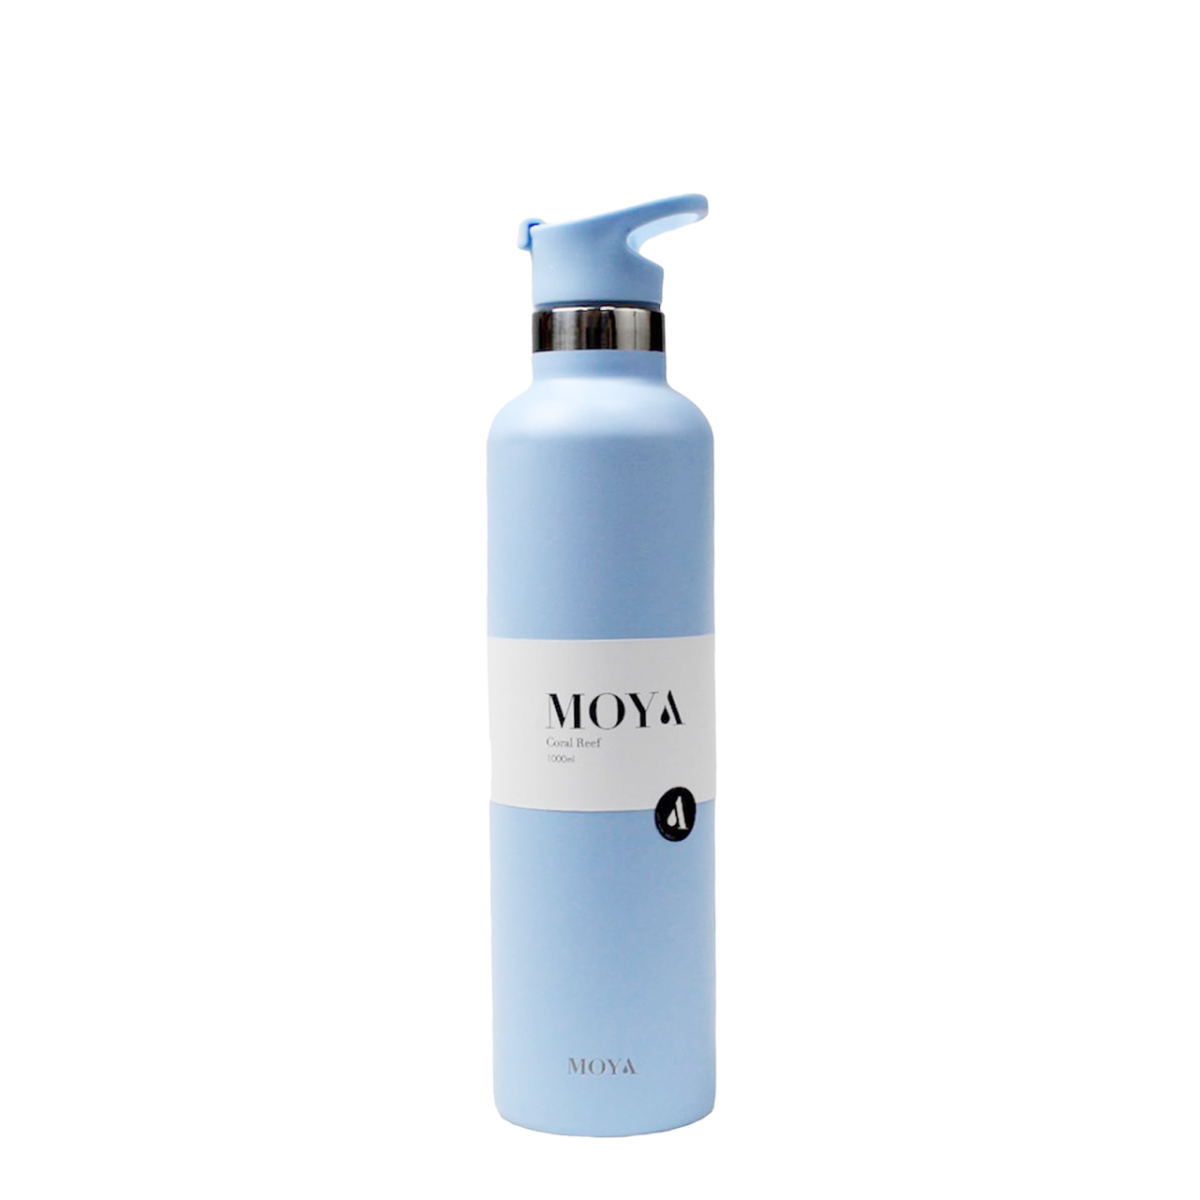 Moya "Coral Reef" 1L Insulated Sustainable Water Bottle Powder Blue